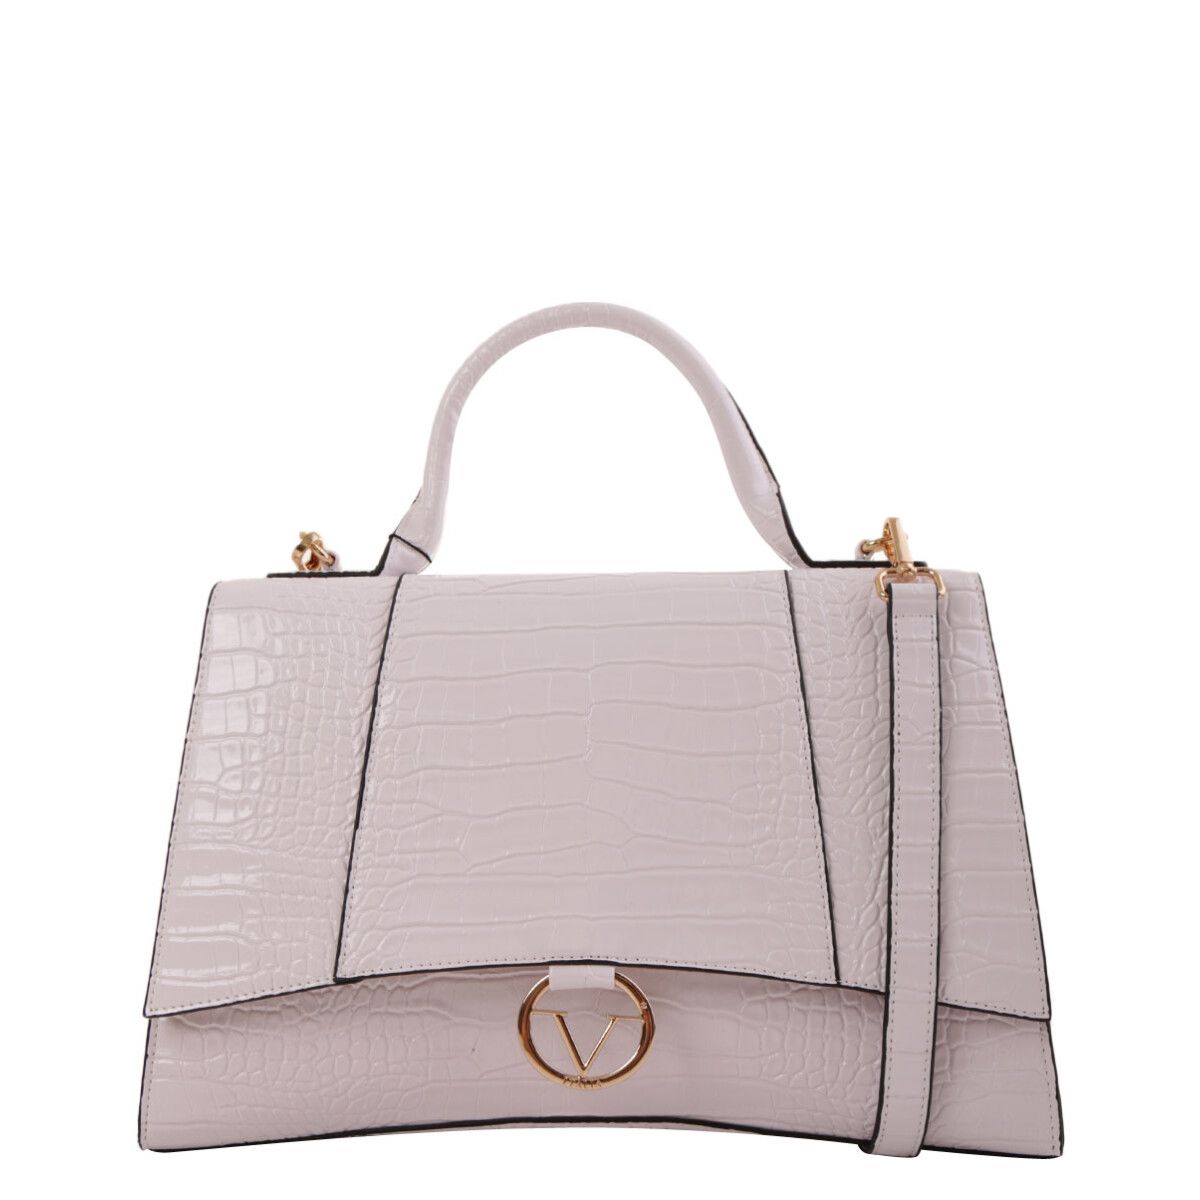 Brand: 19v69 Italia Gender: Women Type: Bags Season: Fall/Winter PRODUCT DETAIL • Color: white • Fastening: zip and automatic buttons • Pockets: inside pockets • Size (cm): 24x33x13 • Details: -handbag -with shoulder strap • Article code: VI20AI0020 COMPOSITION AND MATERIAL • Composition: -100% leather